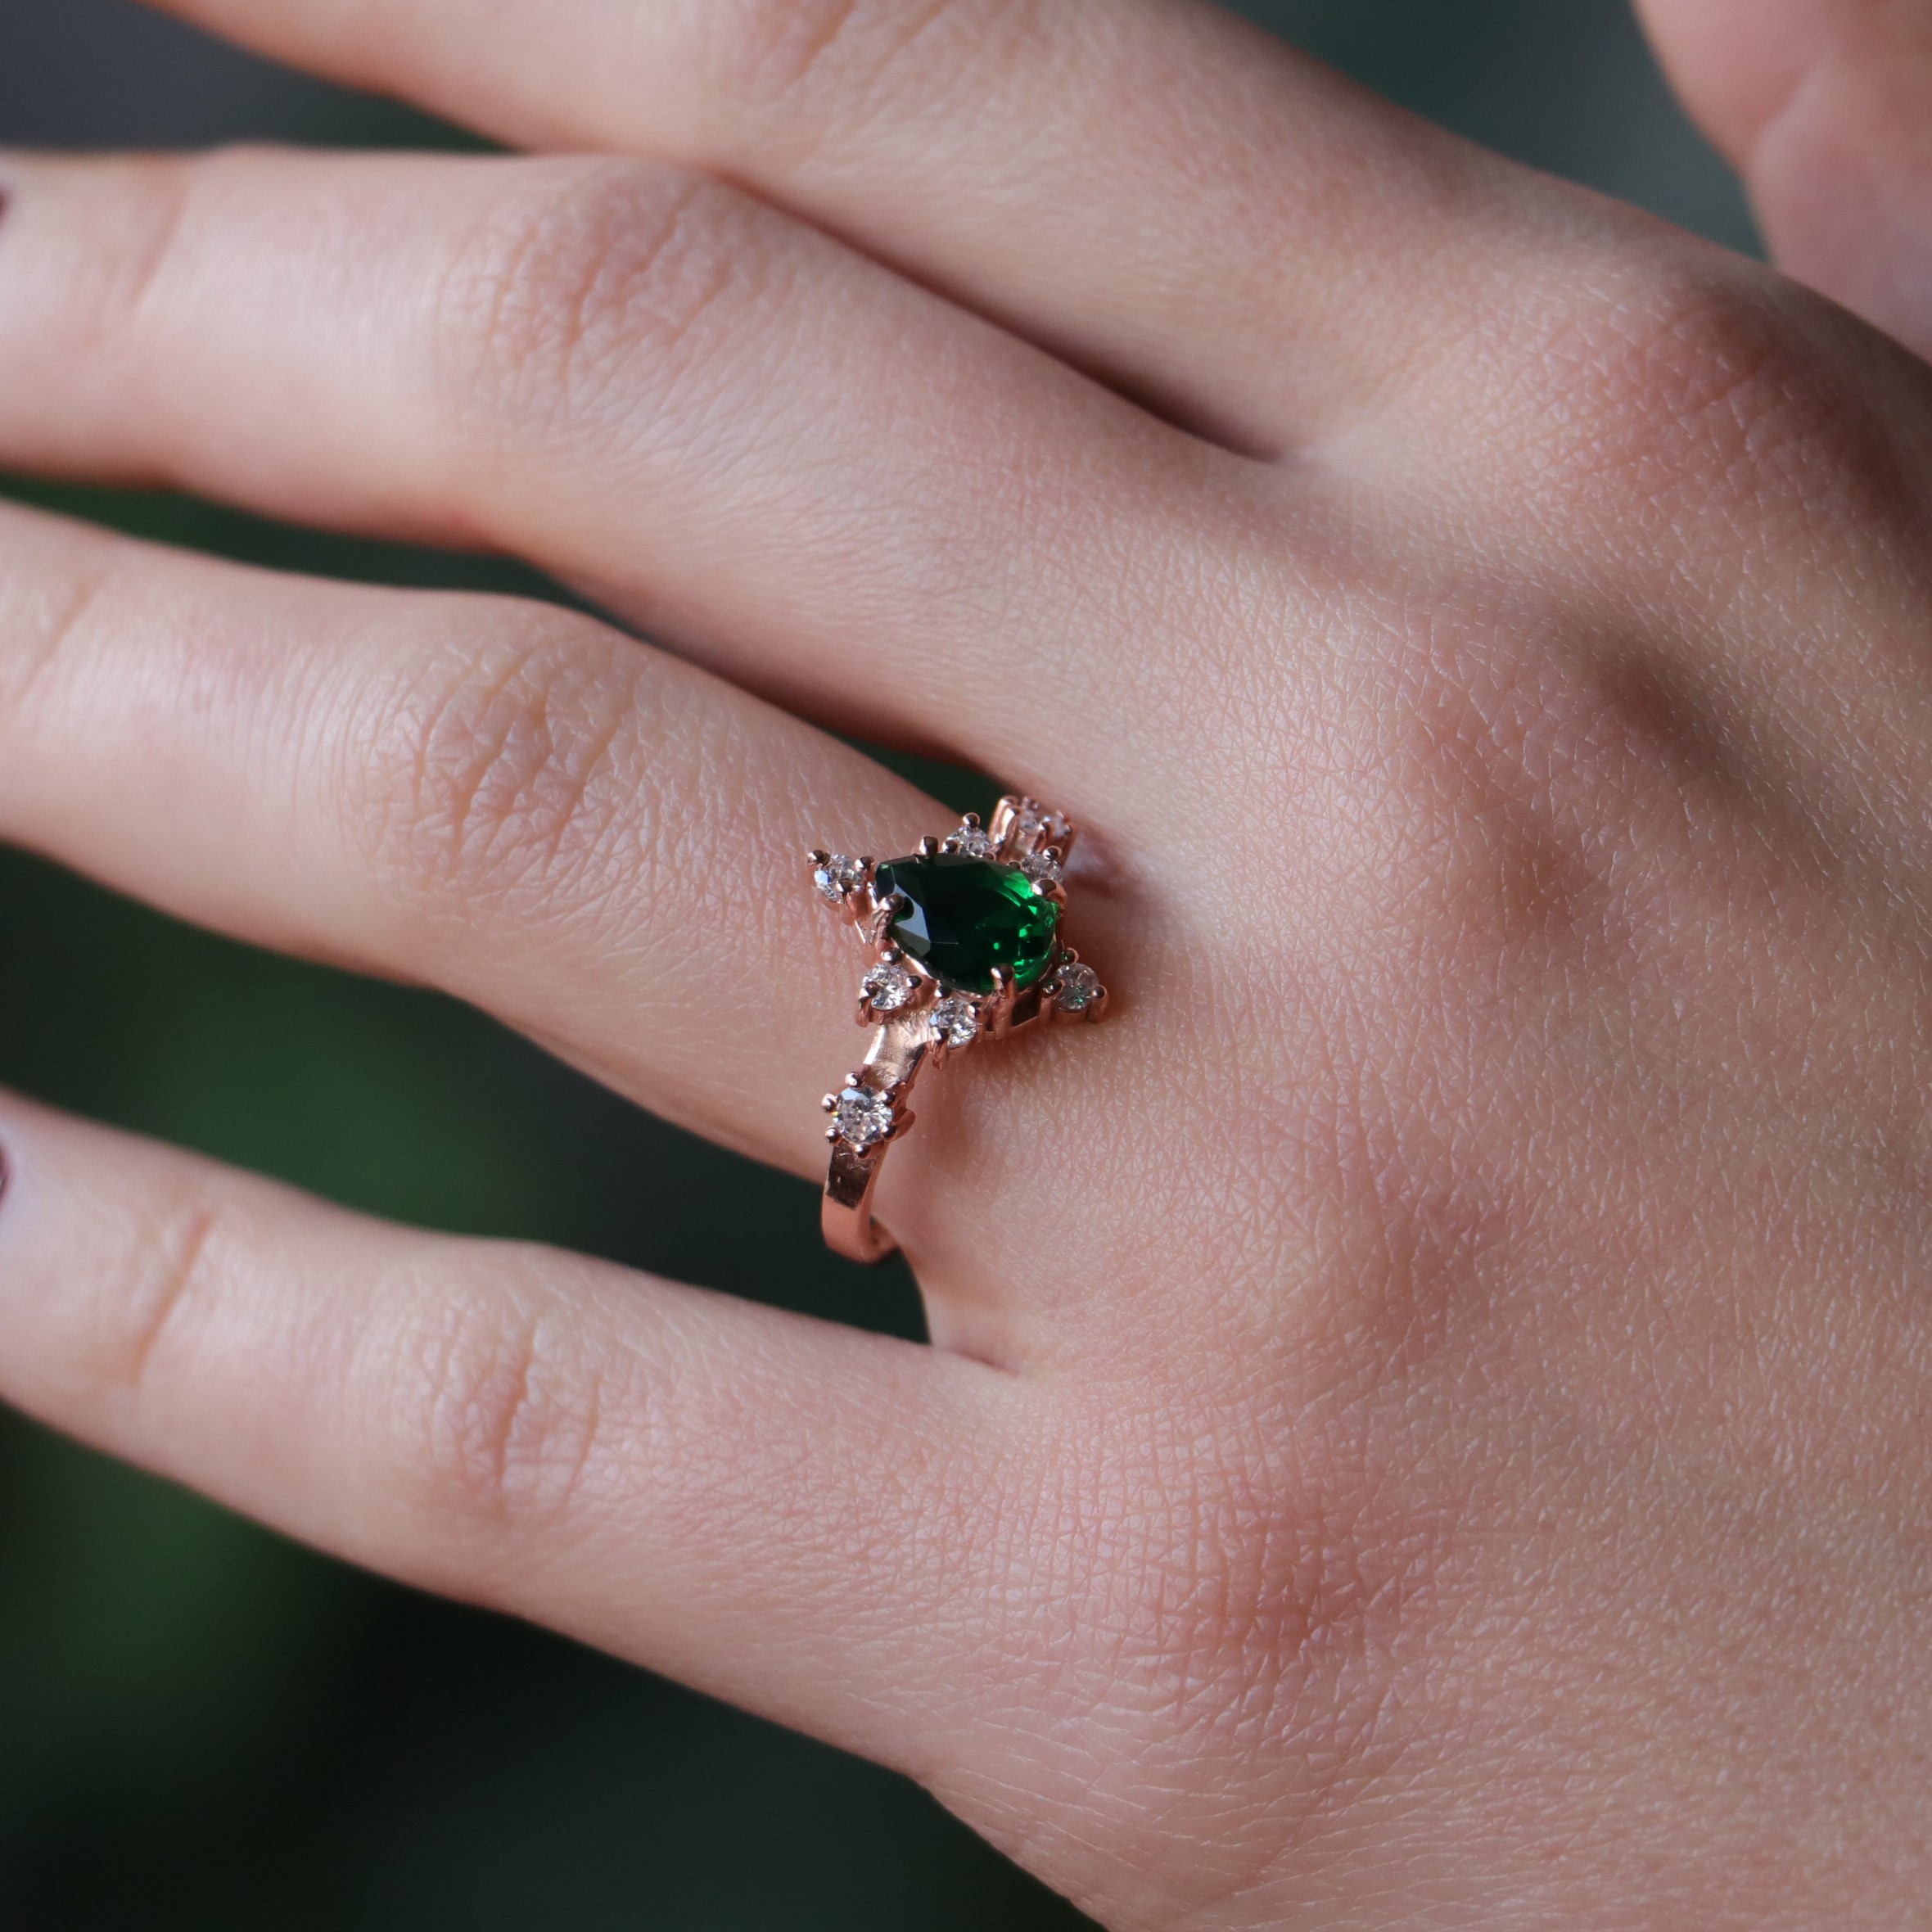 Lab. Emerald and Swarovski 925 Sterling Silver Gold Plated Ring